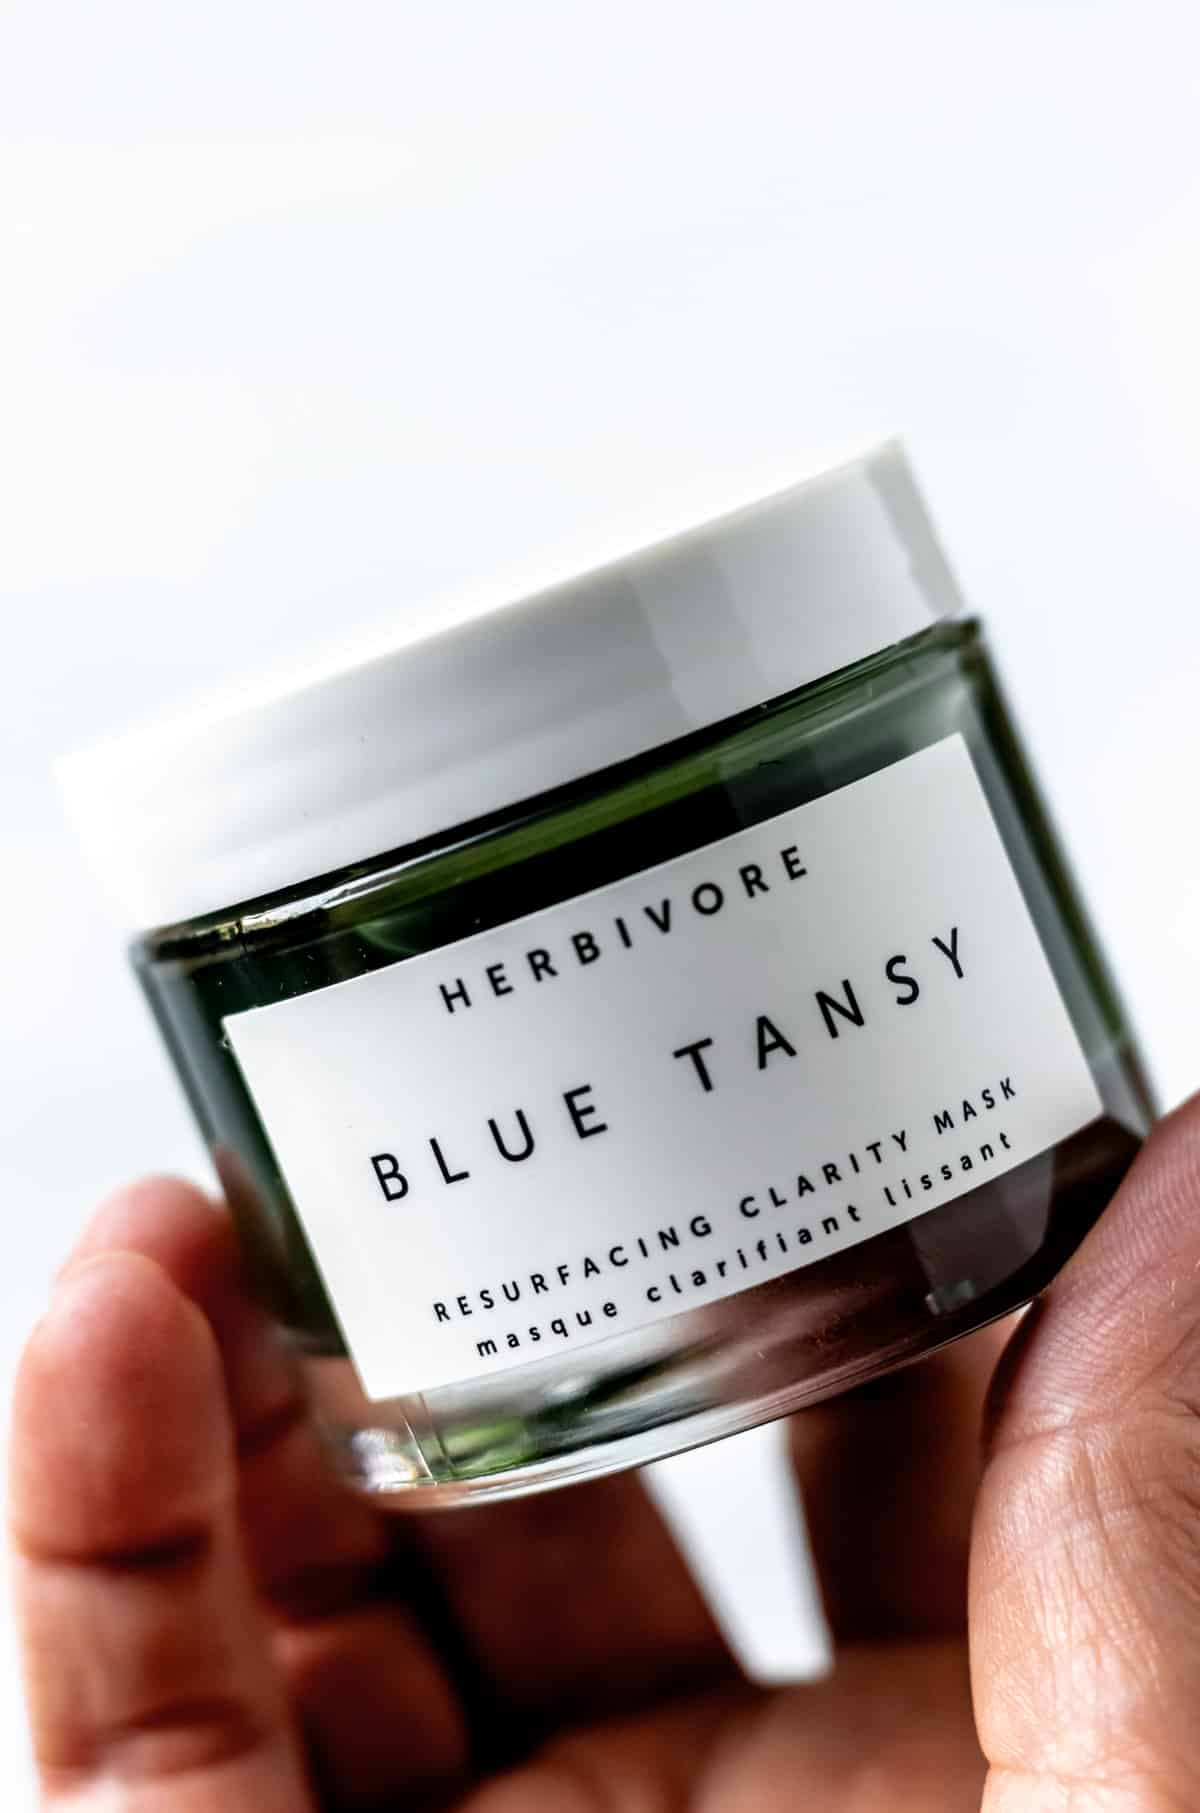 A hand holding up a jar of Herbivore Blue Tansy face mask.